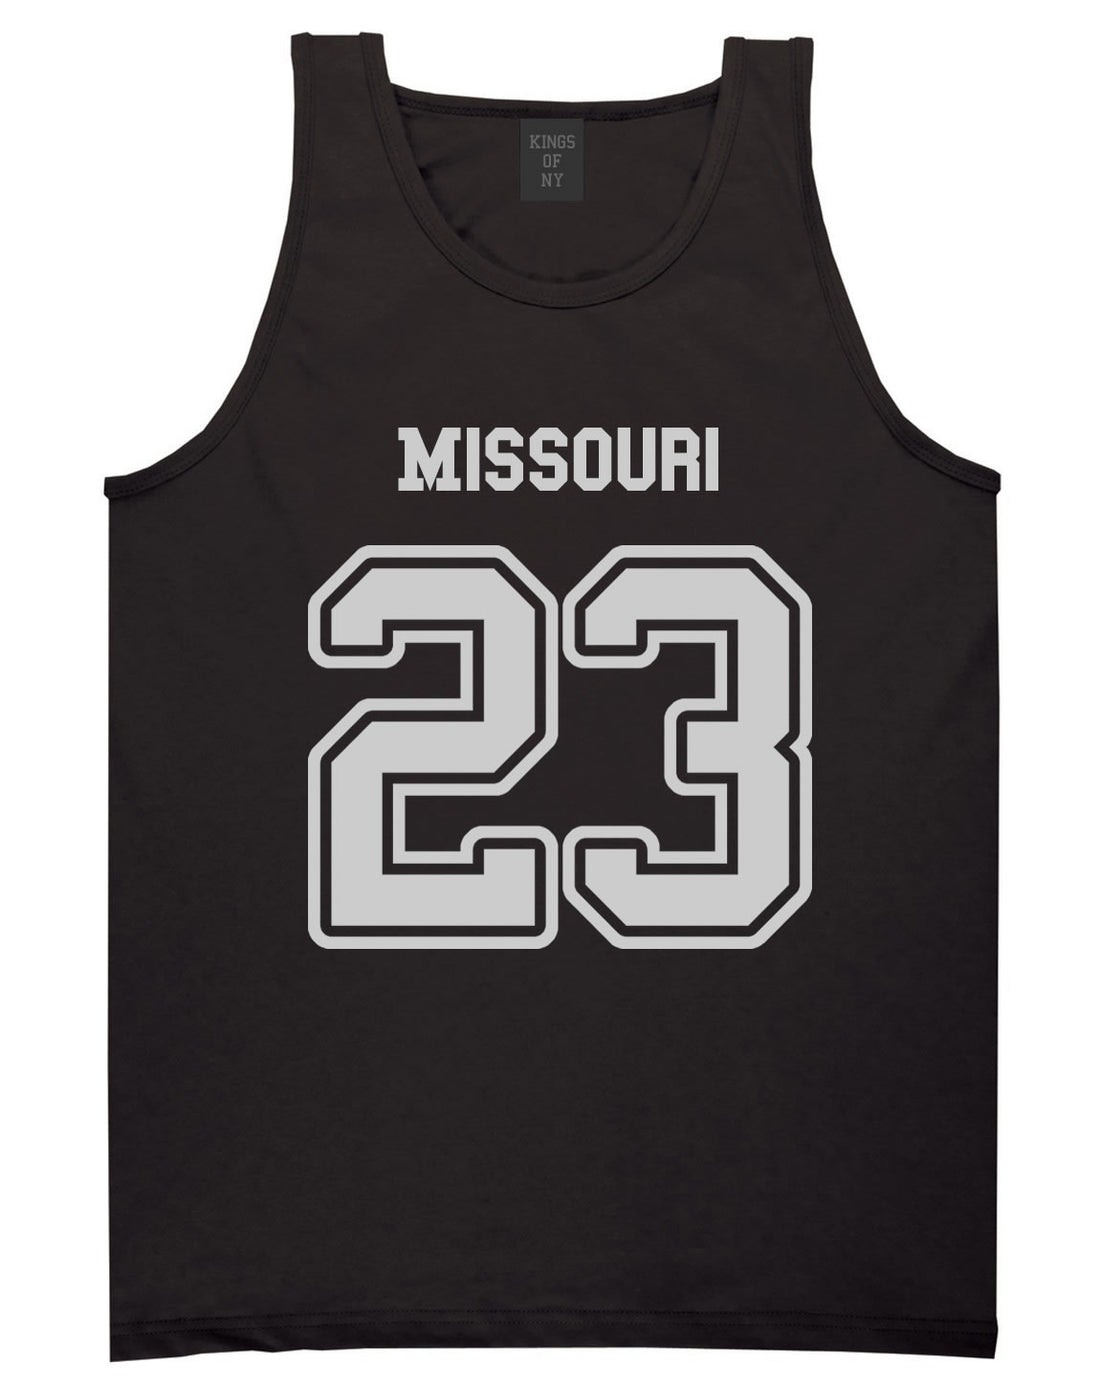 Sport Style Missouri 23 Team State Jersey Mens Tank Top By Kings Of NY